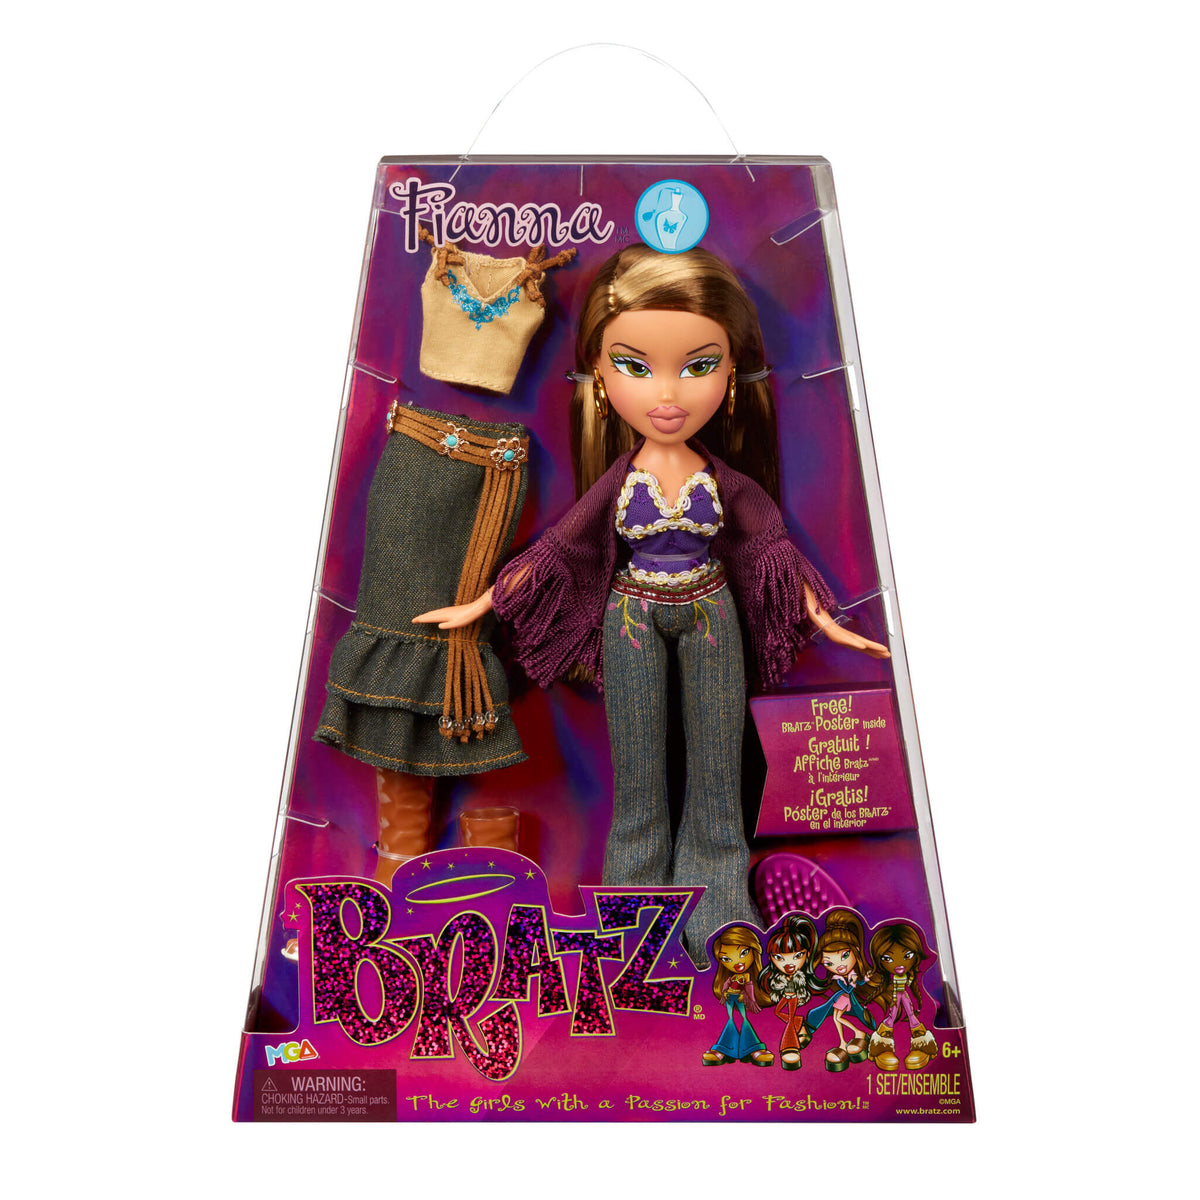 Bratz Original Fashion Doll Fianna Series 3 with 2 Outfits and